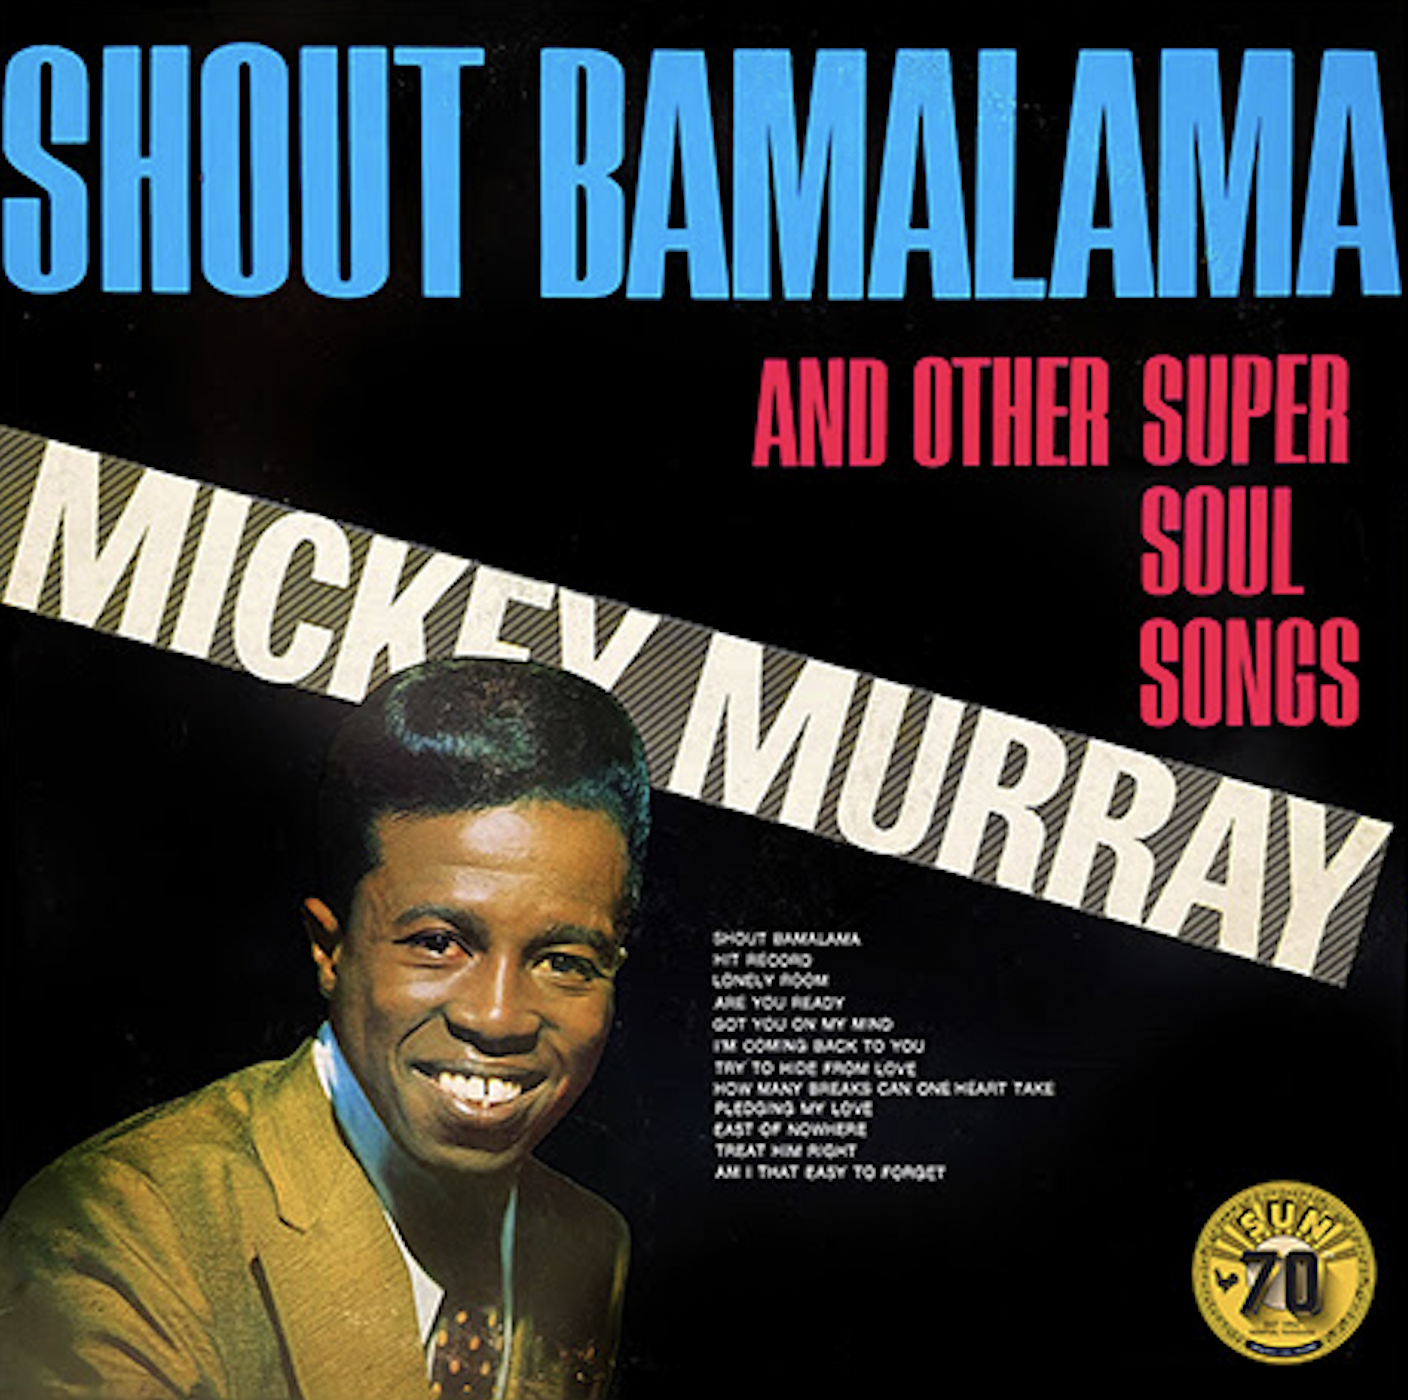 Album artwork for Album artwork for Shout Bamalama And Other Super Soul Songs by Mickey Murray by Shout Bamalama And Other Super Soul Songs - Mickey Murray